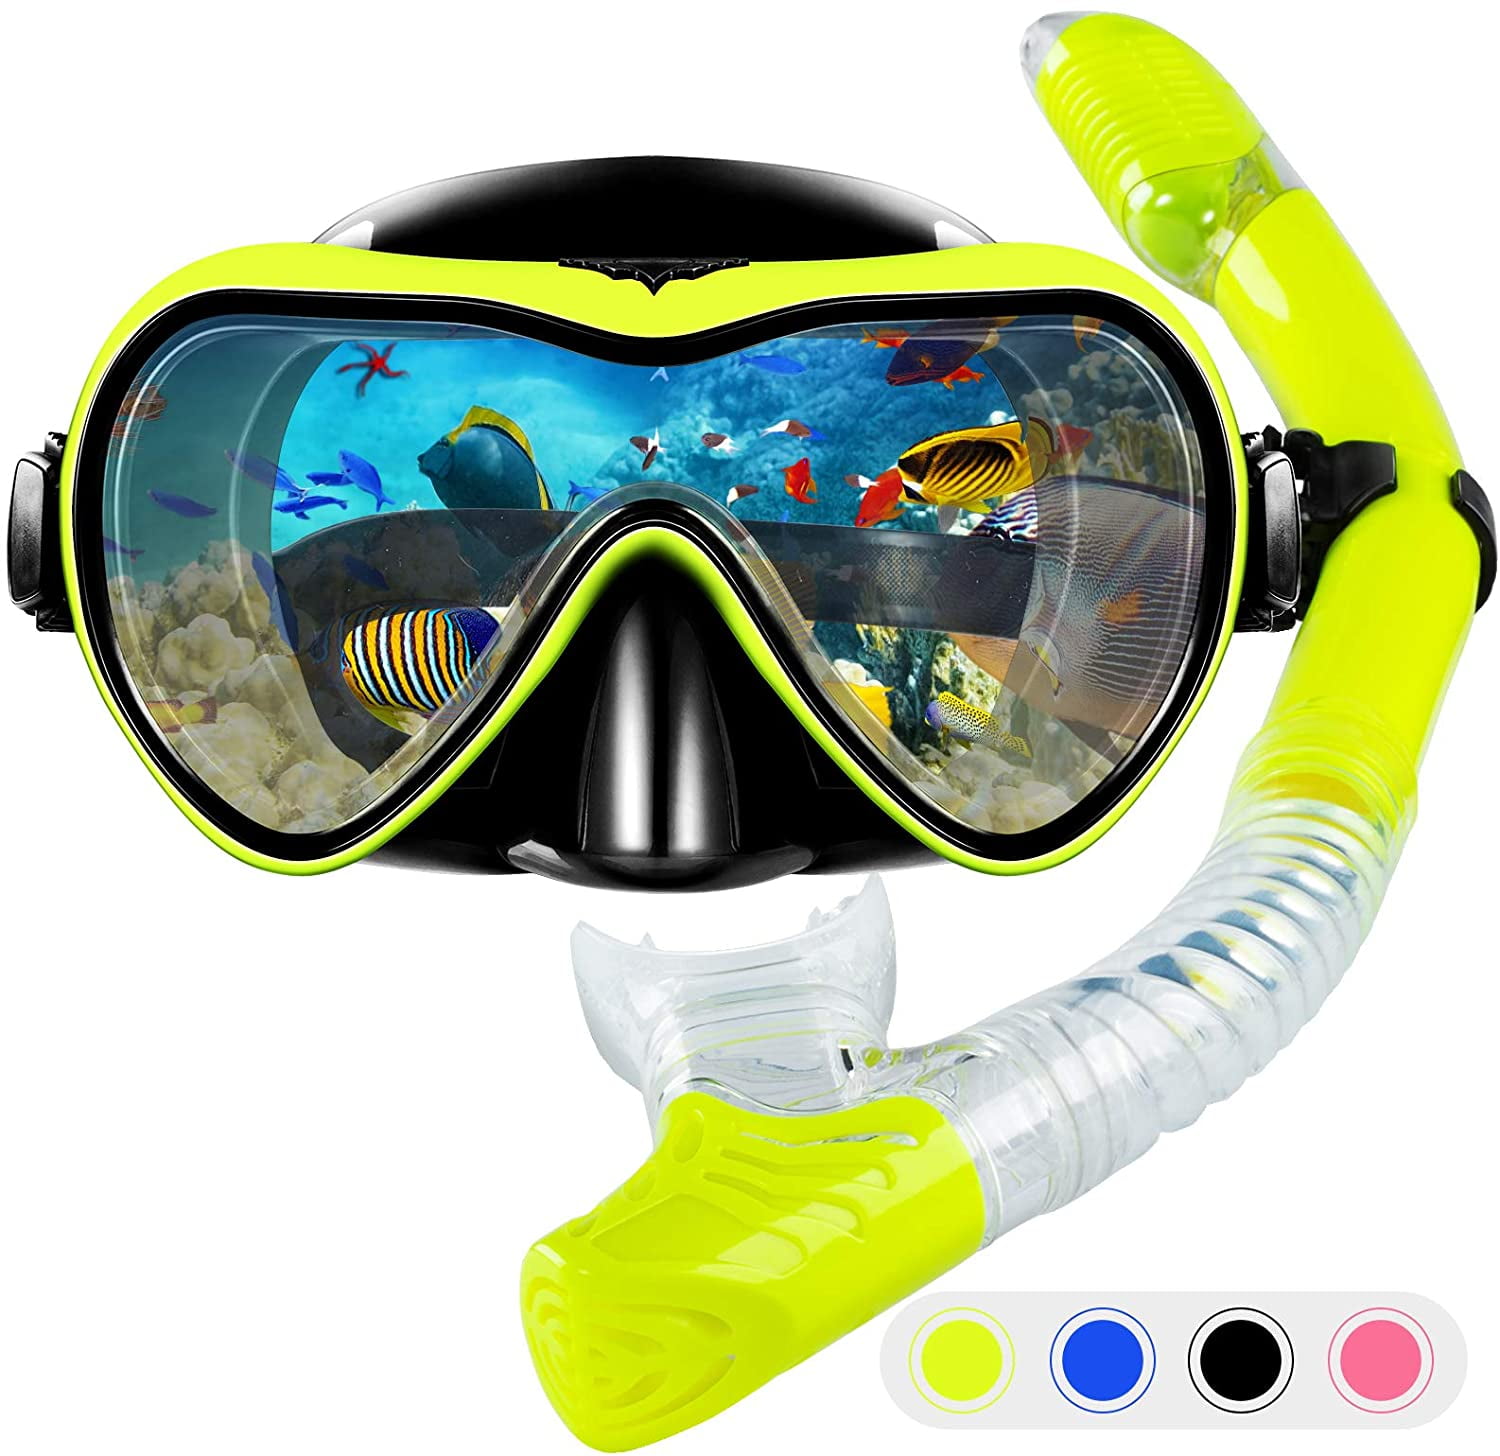 Foldable Scuba Diving Swimming Underwater Easy Breath Snorkel Mask with 100% Anti-Fog Dry Top Set/Support Add Mini Oxygen Tank for Youth & Adults Full Face Snorkeling Mask 